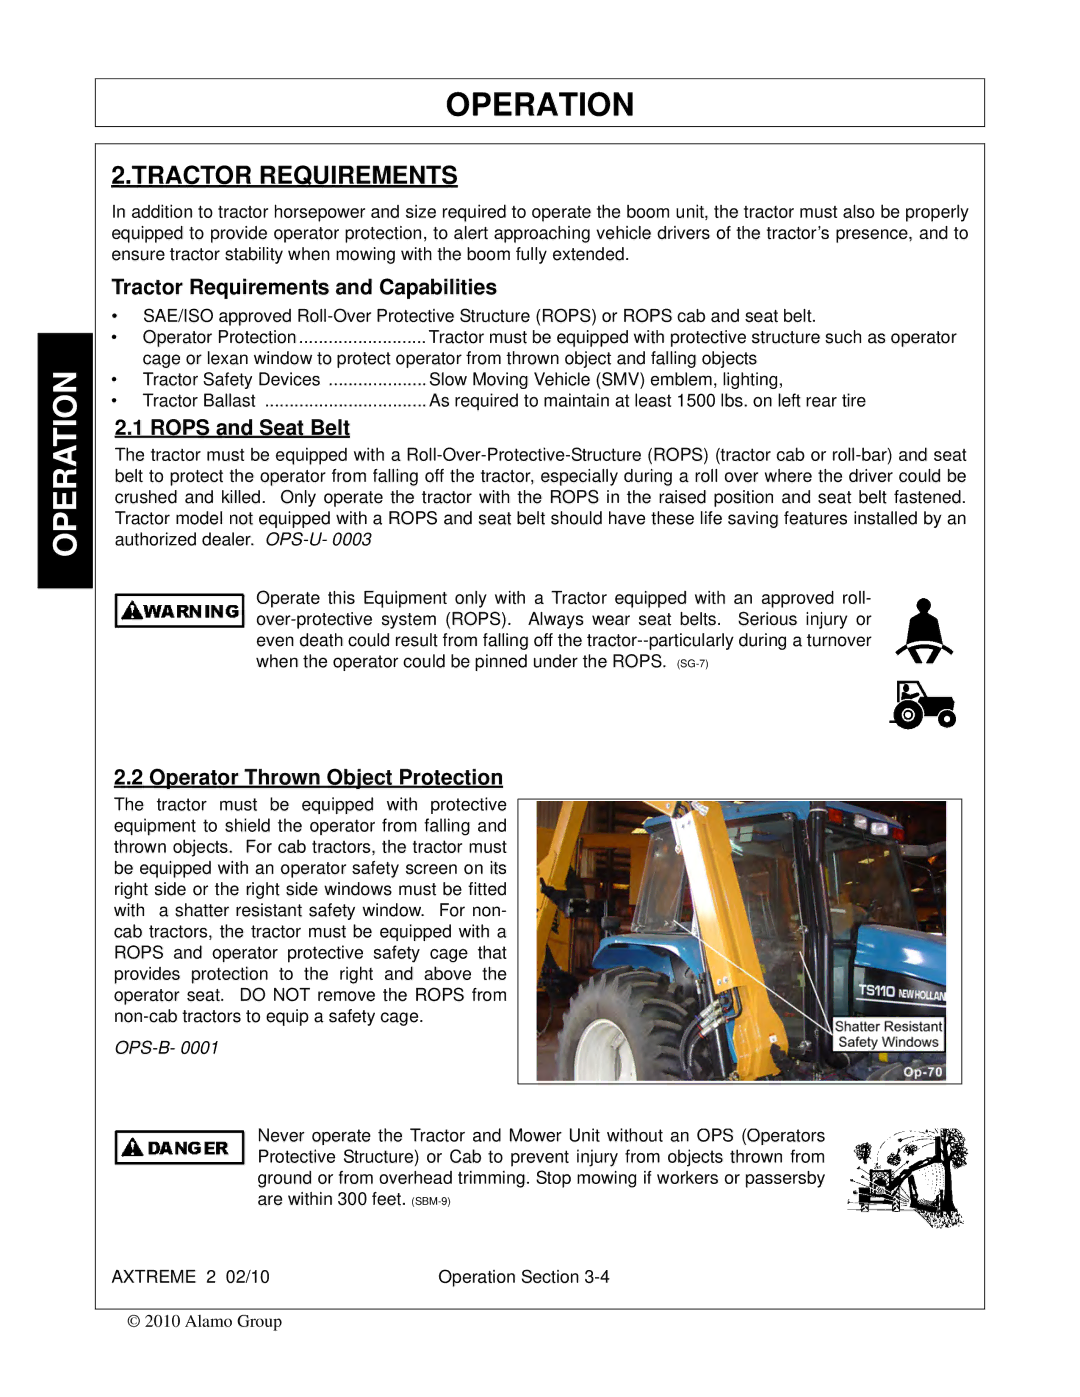 Alamo Lawn Mower manual Tractor Requirements and Capabilities, Rops and Seat Belt, Operator Thrown Object Protection 